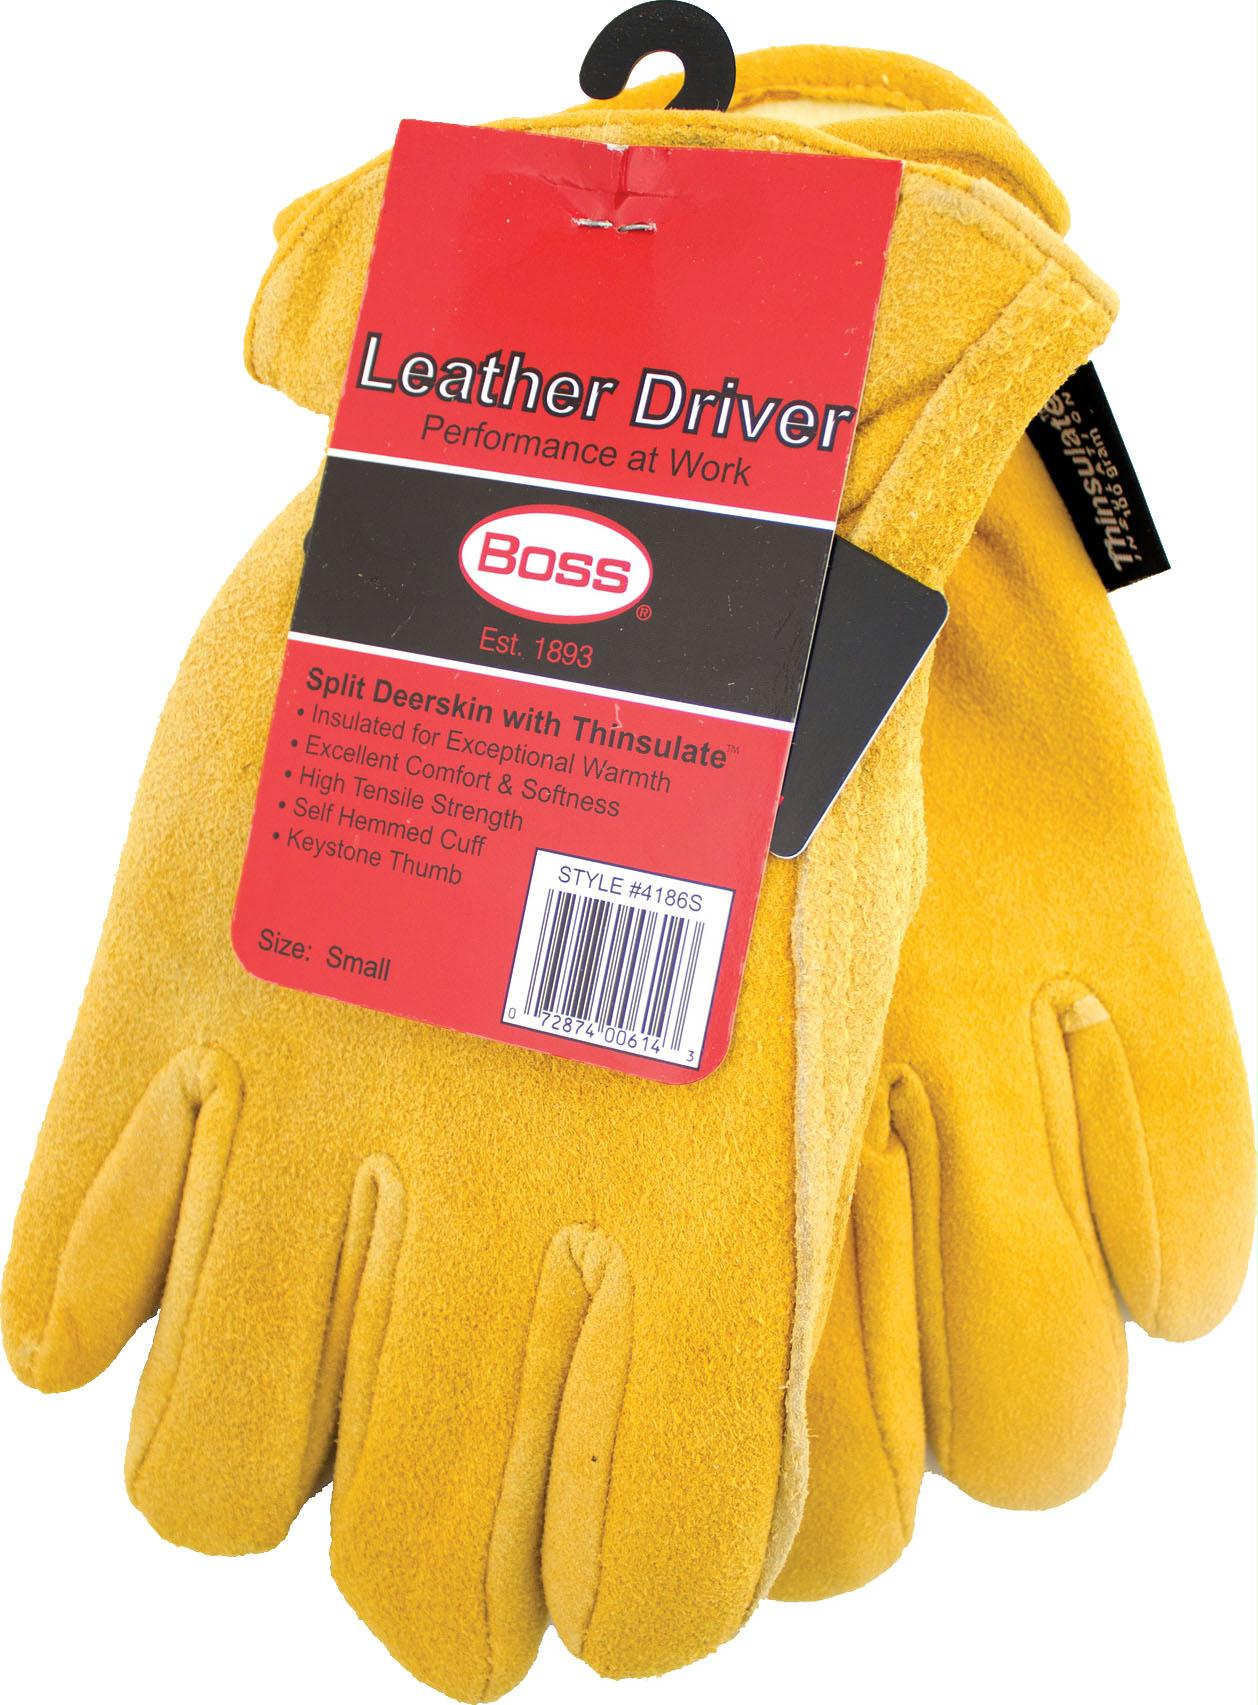 Therm Insulated Split Deerskin Driver Glove - aomega-products